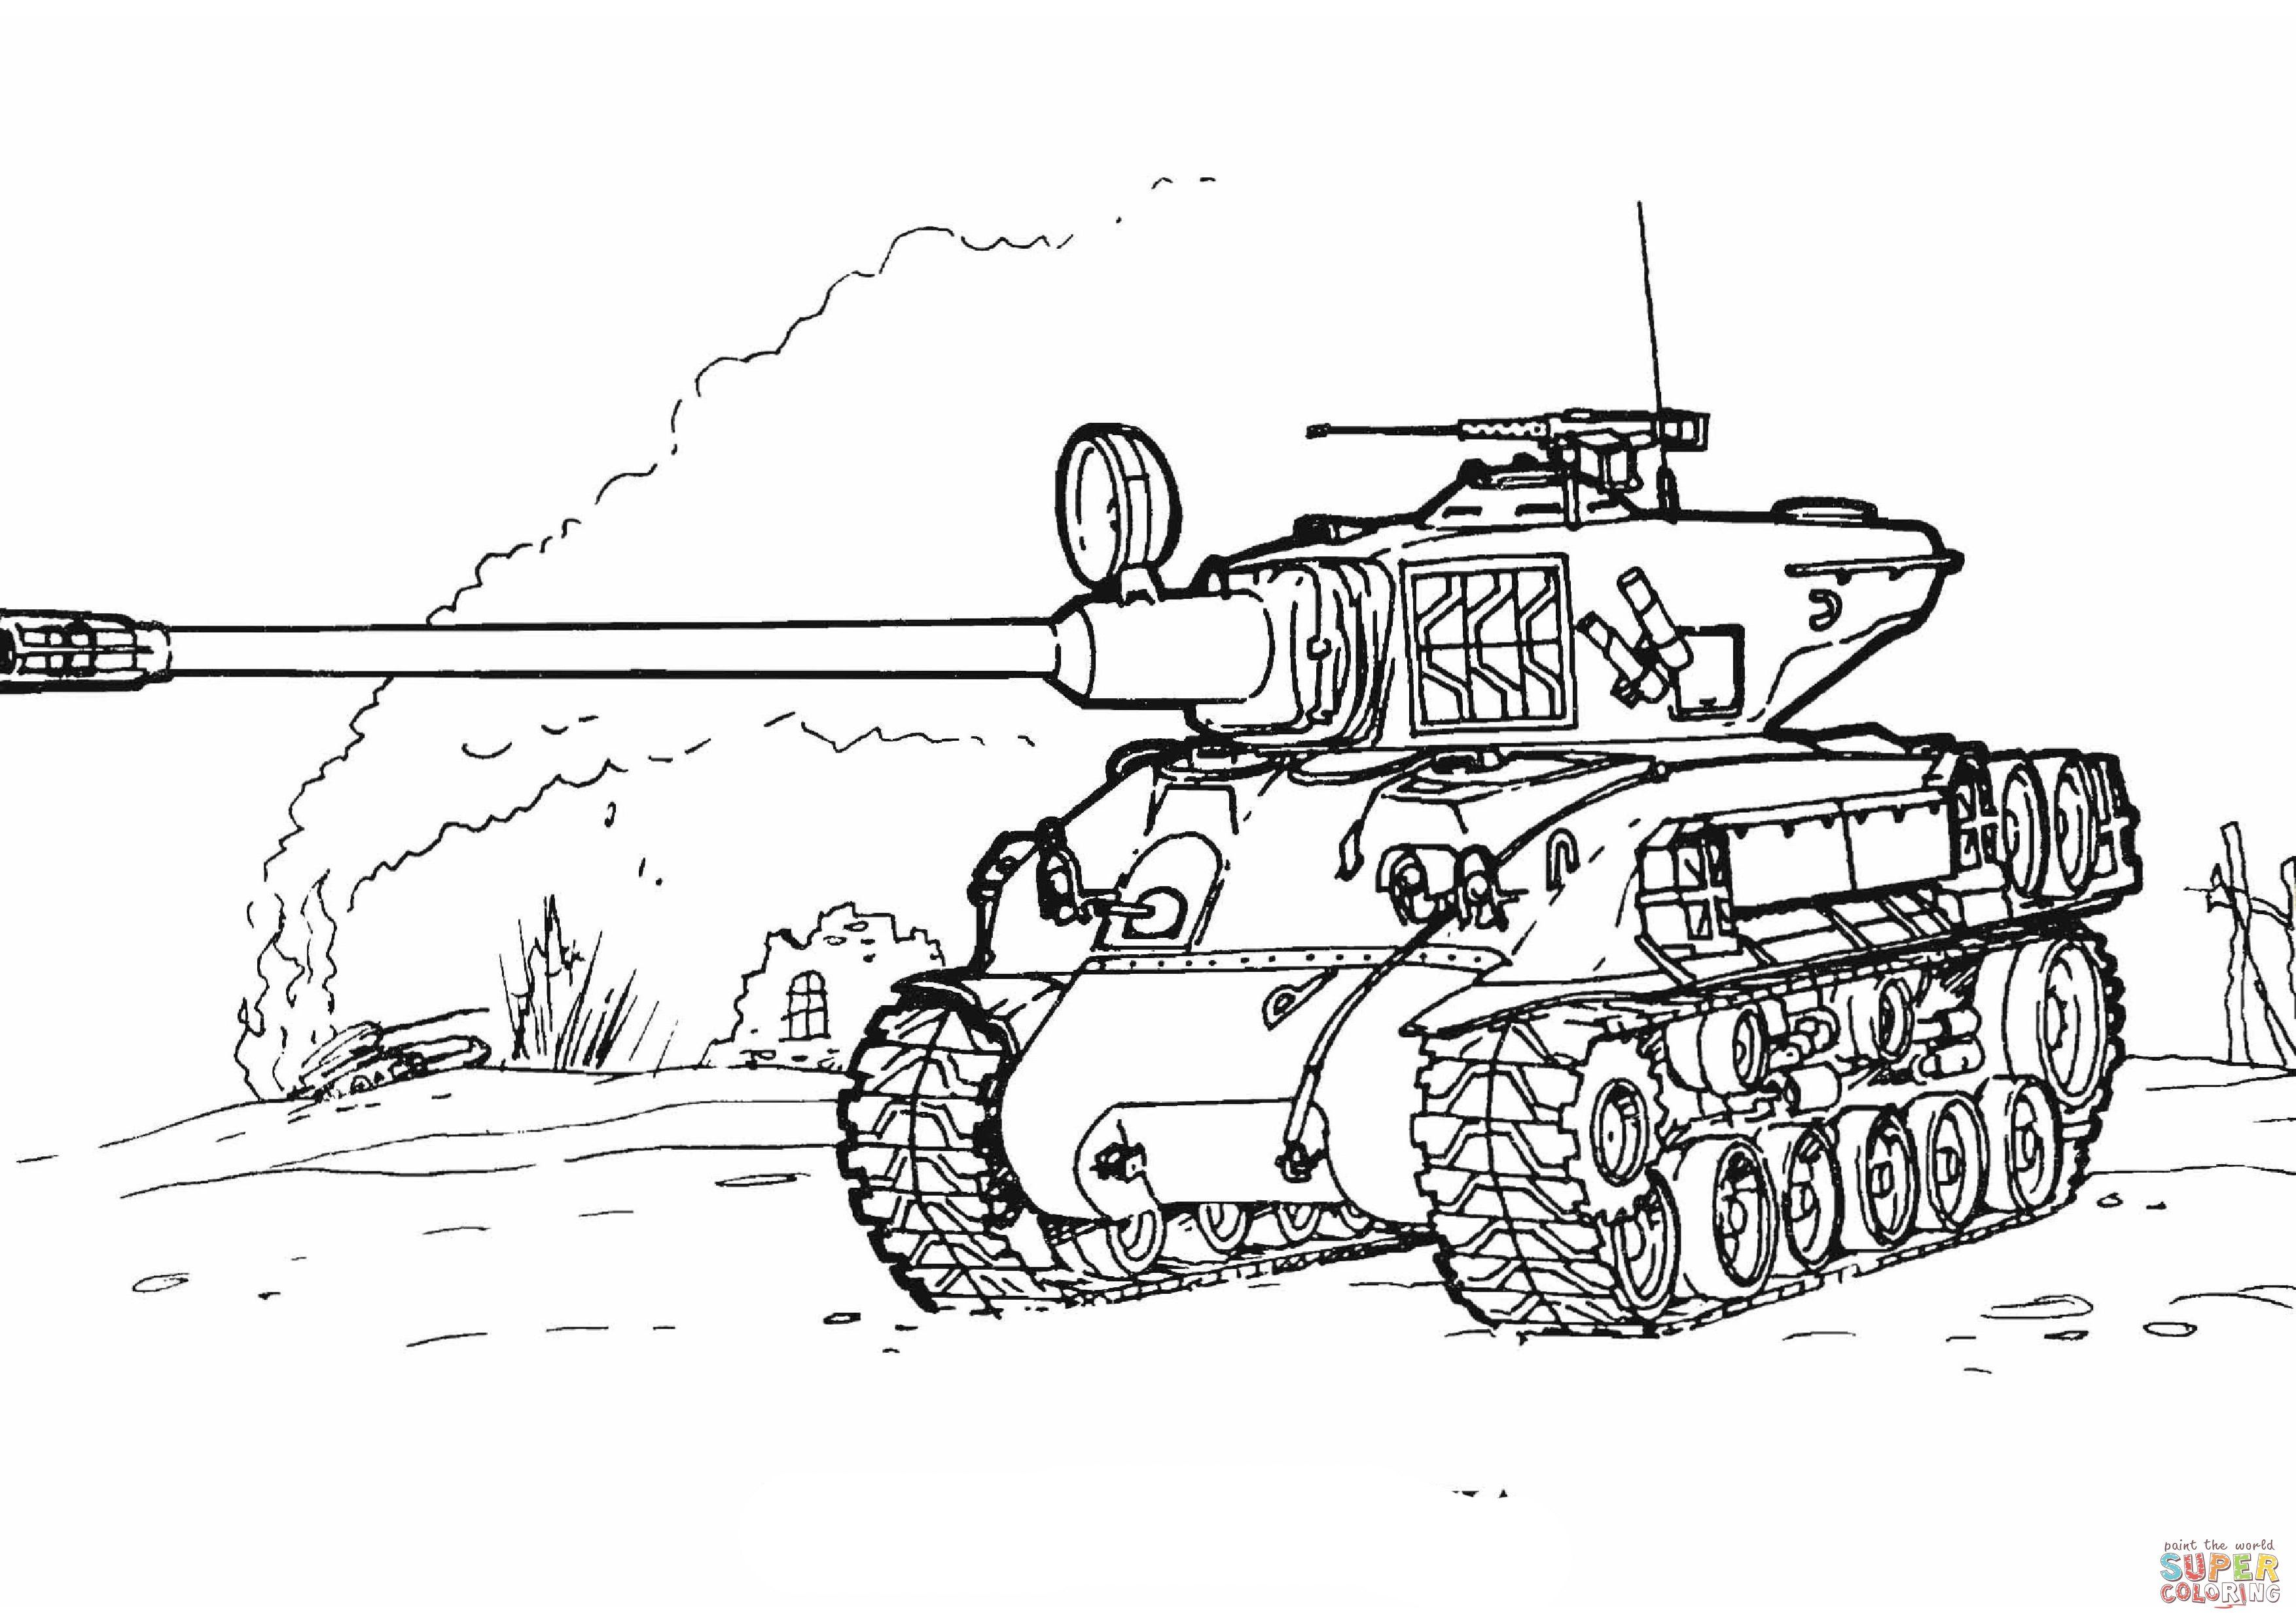 army tank coloring pages for kids 134 | Best Coloring Page Site